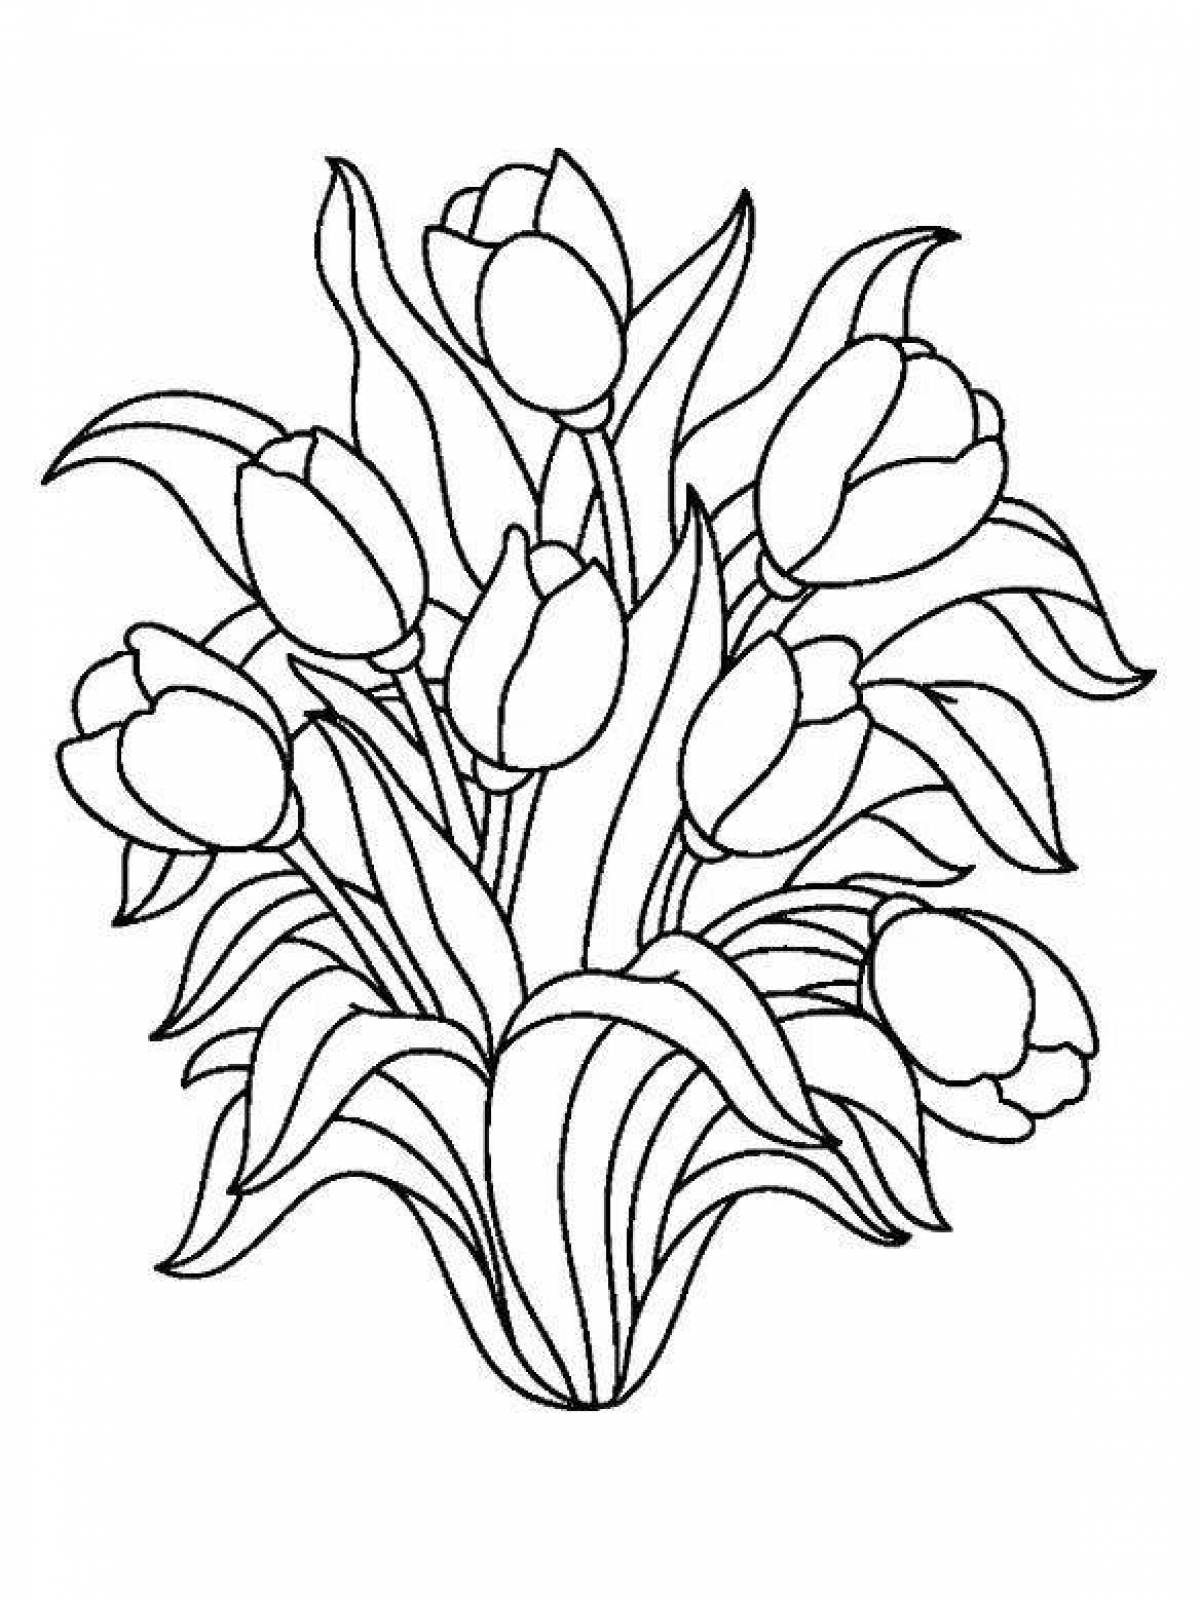 Coloring page brilliant bouquet of tulips